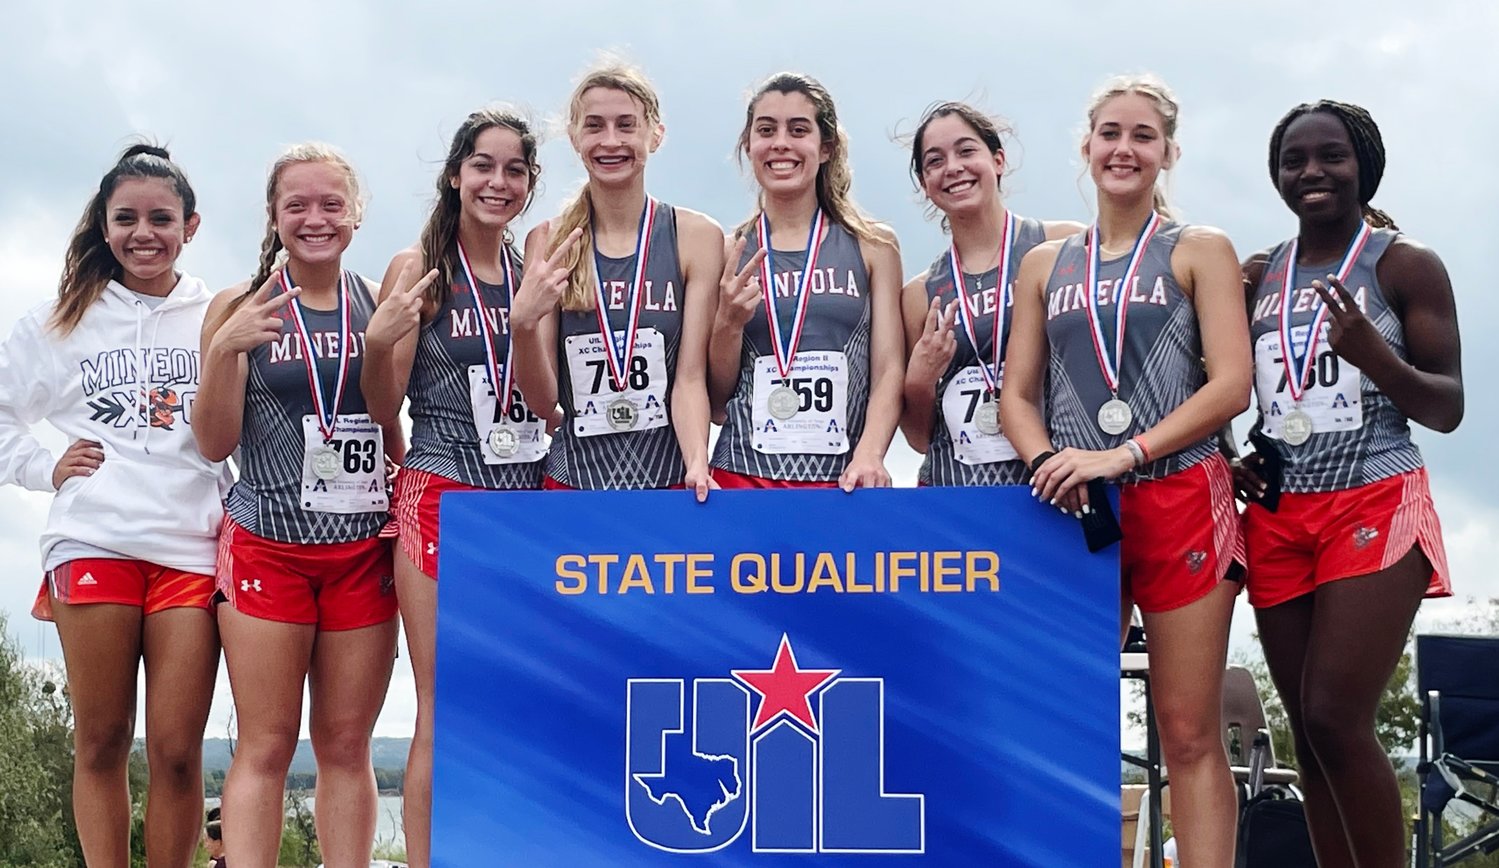 The Mineola state cross country qualifiers include, from left, Mariana Delgadillo, Riley Weekly, Keilee Riley, Olivia Hughes, Raquel Hughes, Kapri Riley, Hannah Zoch and Shylah Kratmeyer.